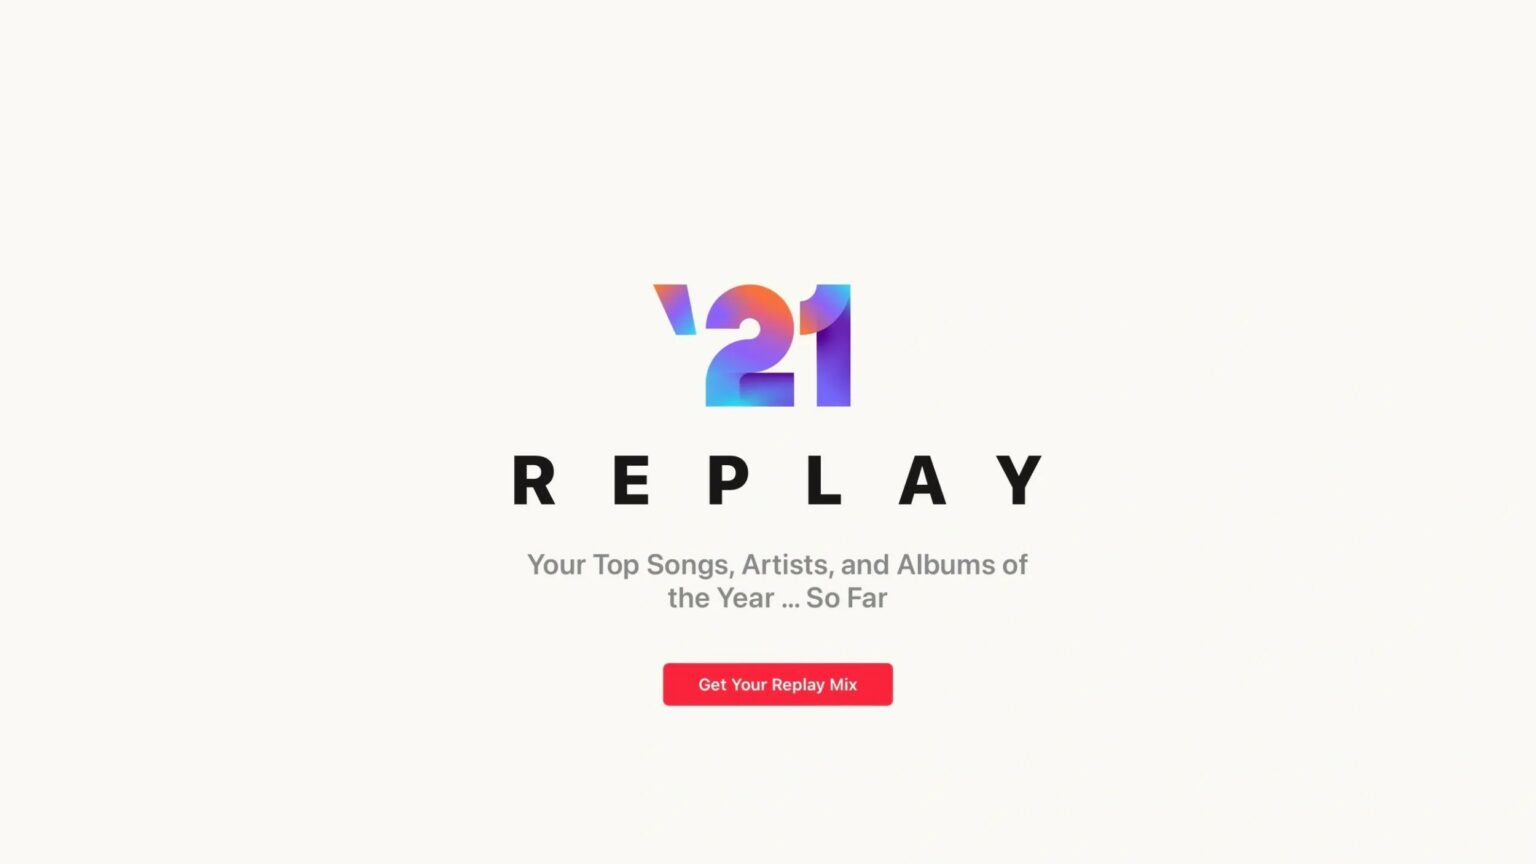 Apple Music Replay let's you see your favorite artists, tunes and playlists from the year.